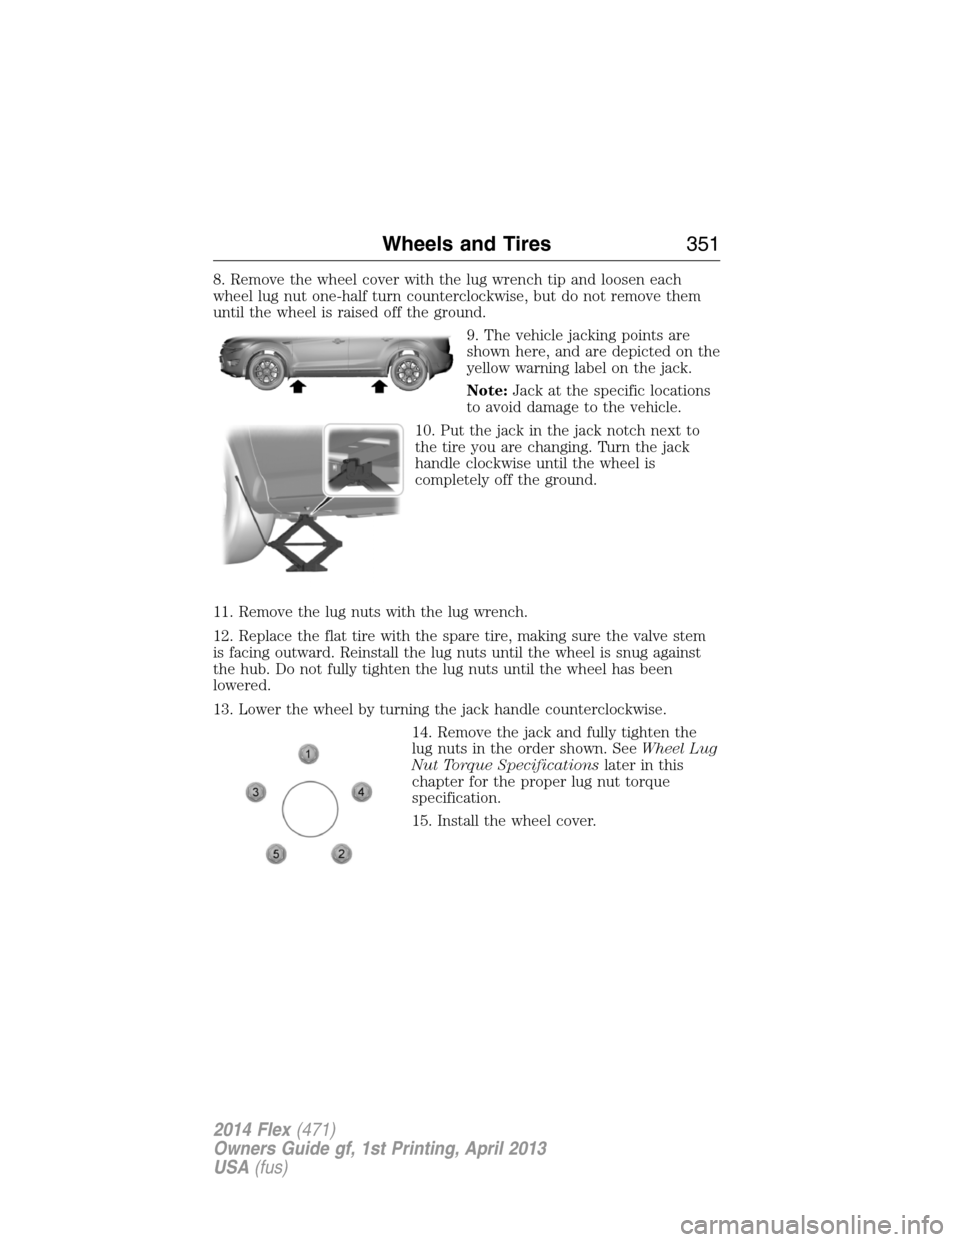 FORD FLEX 2014 1.G Owners Manual 8. Remove the wheel cover with the lug wrench tip and loosen each
wheel lug nut one-half turn counterclockwise, but do not remove them
until the wheel is raised off the ground.
9. The vehicle jacking 